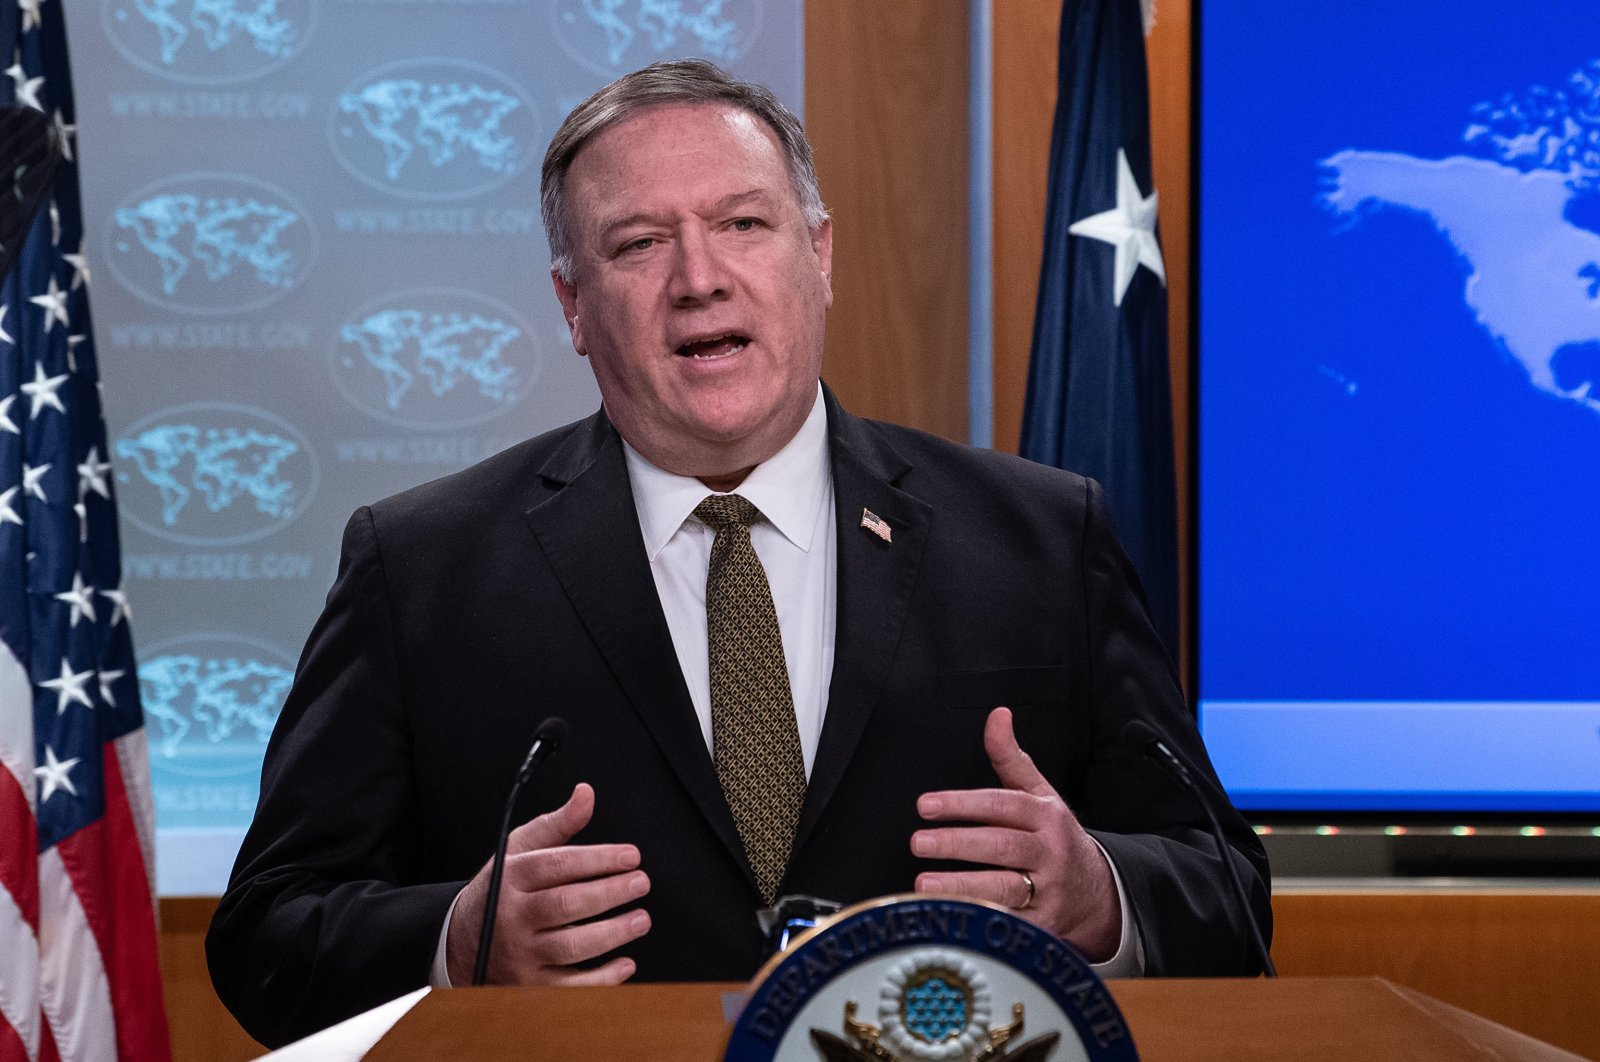 Secretary of State Mike Pompeo speaks during a press briefing at the State Department on Wednesday, April 22, 2020, in Washington. (AP Photo)